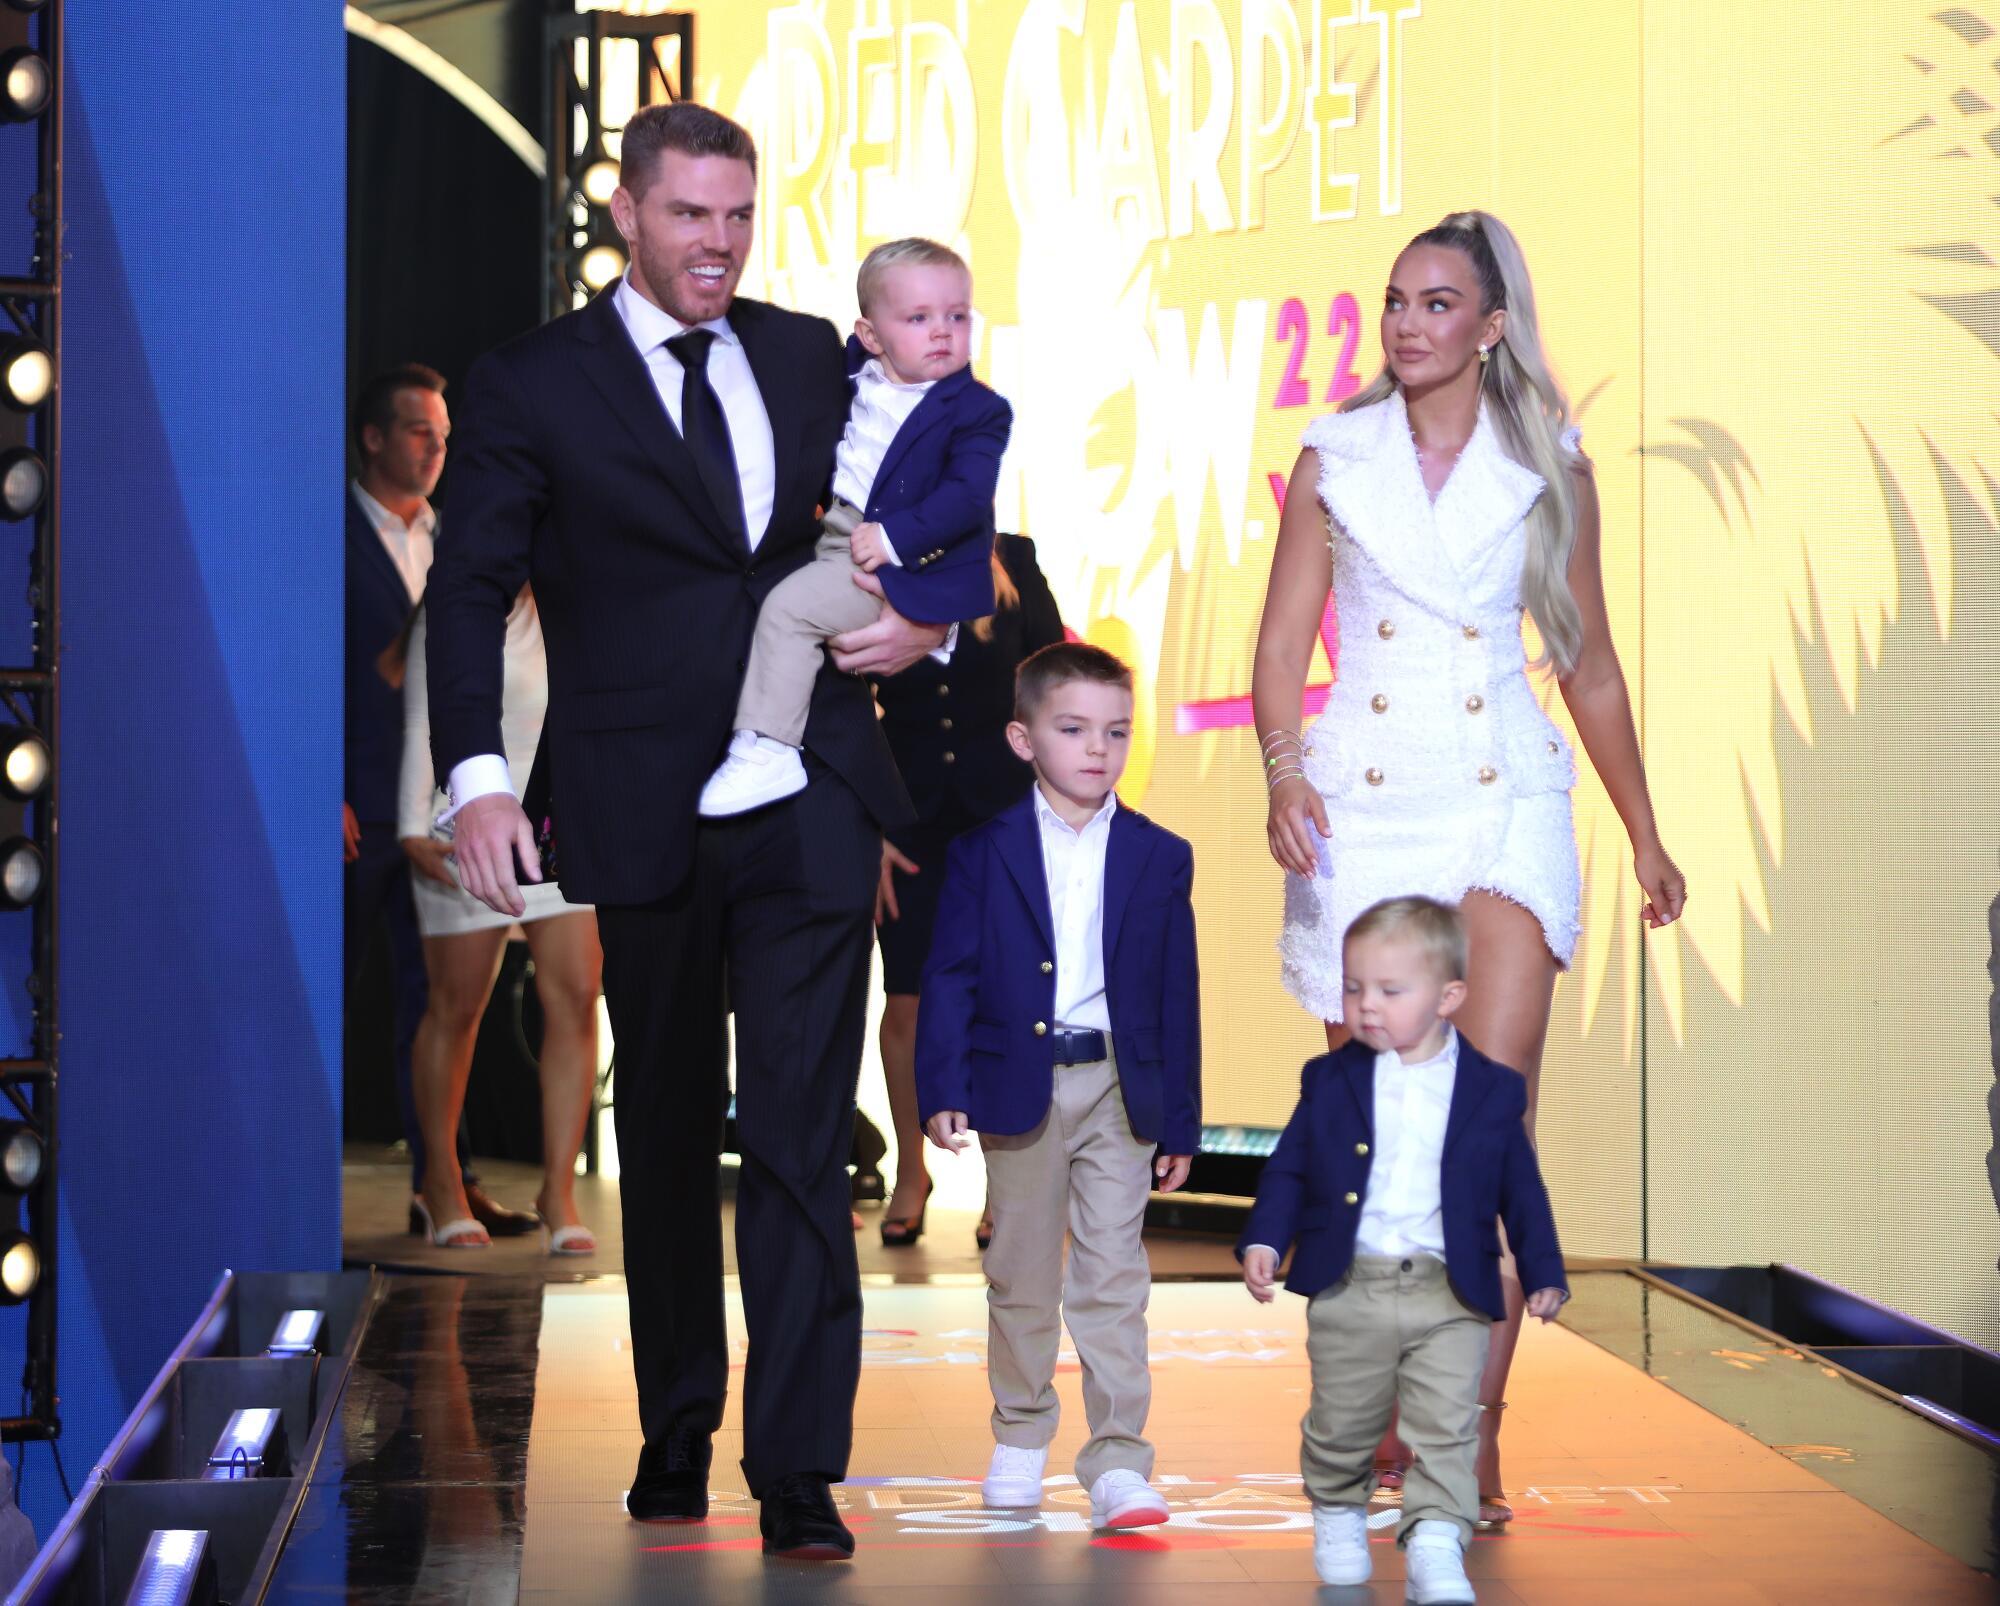 Freddie Freeman in a dark suit arrives with his family at the 2022 MLB All-Star Game Red Carpet Show.